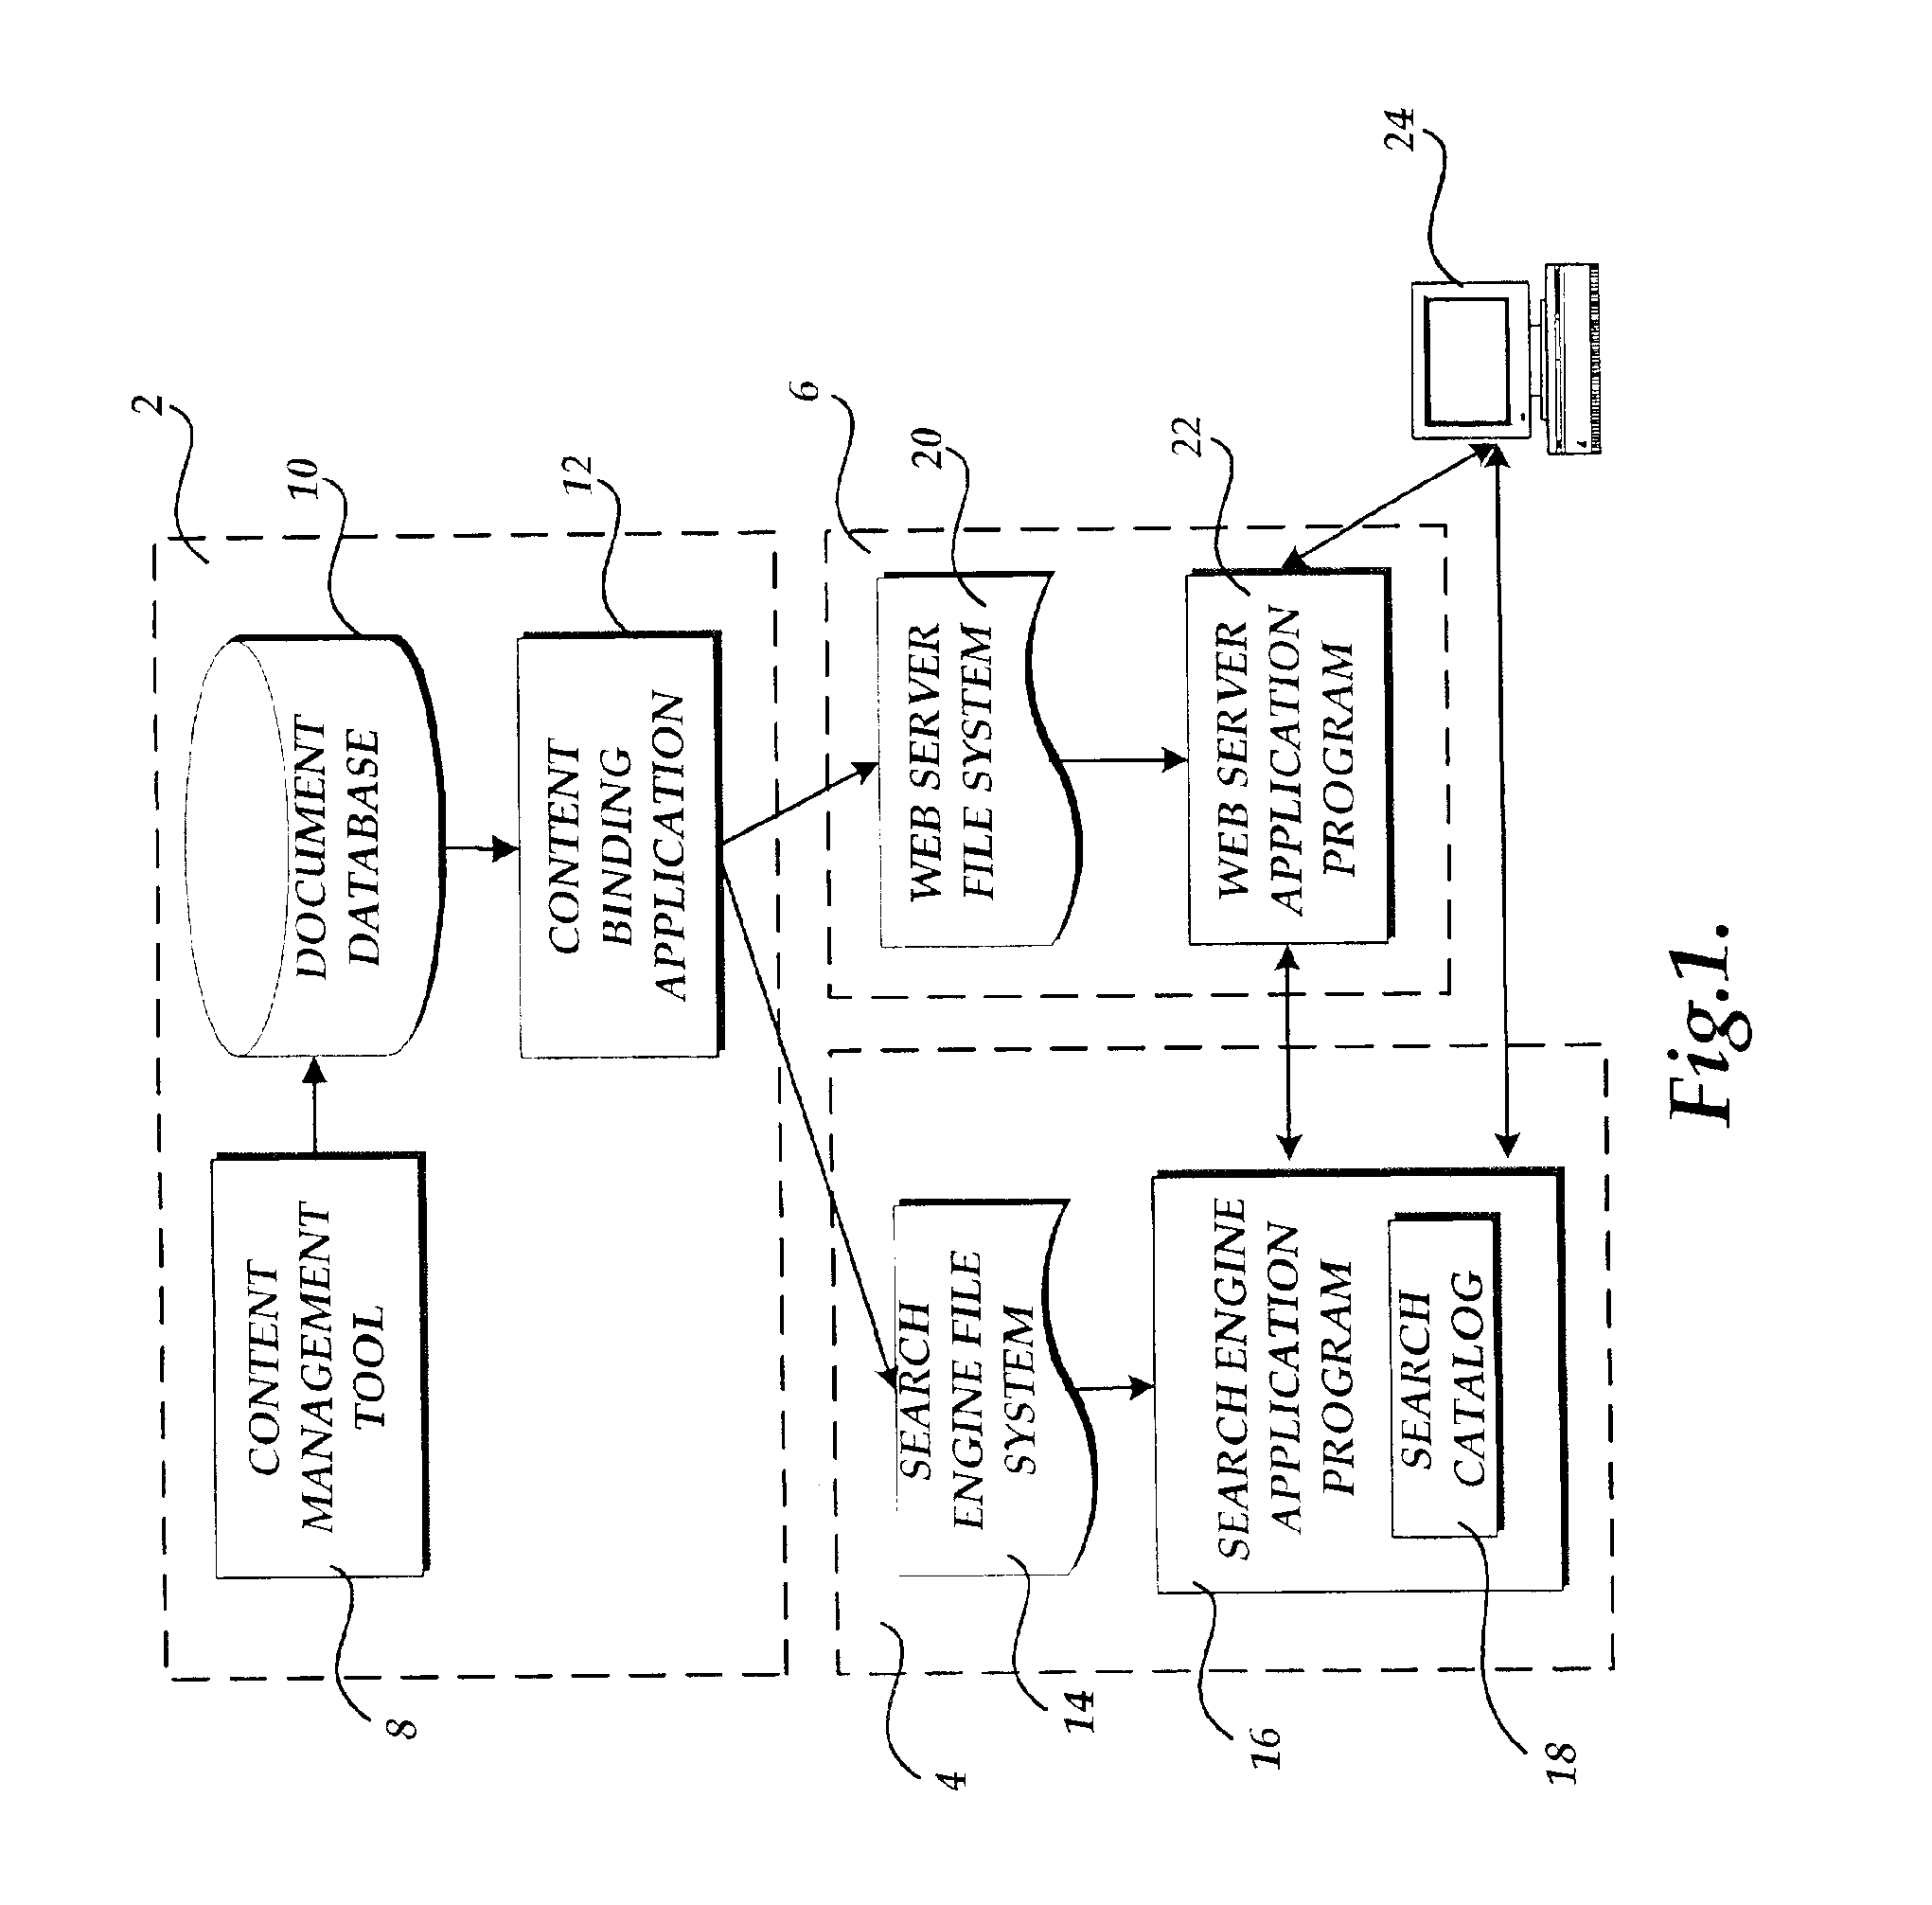 Method, apparatus, and computer-readable medium for searching and navigating a document database